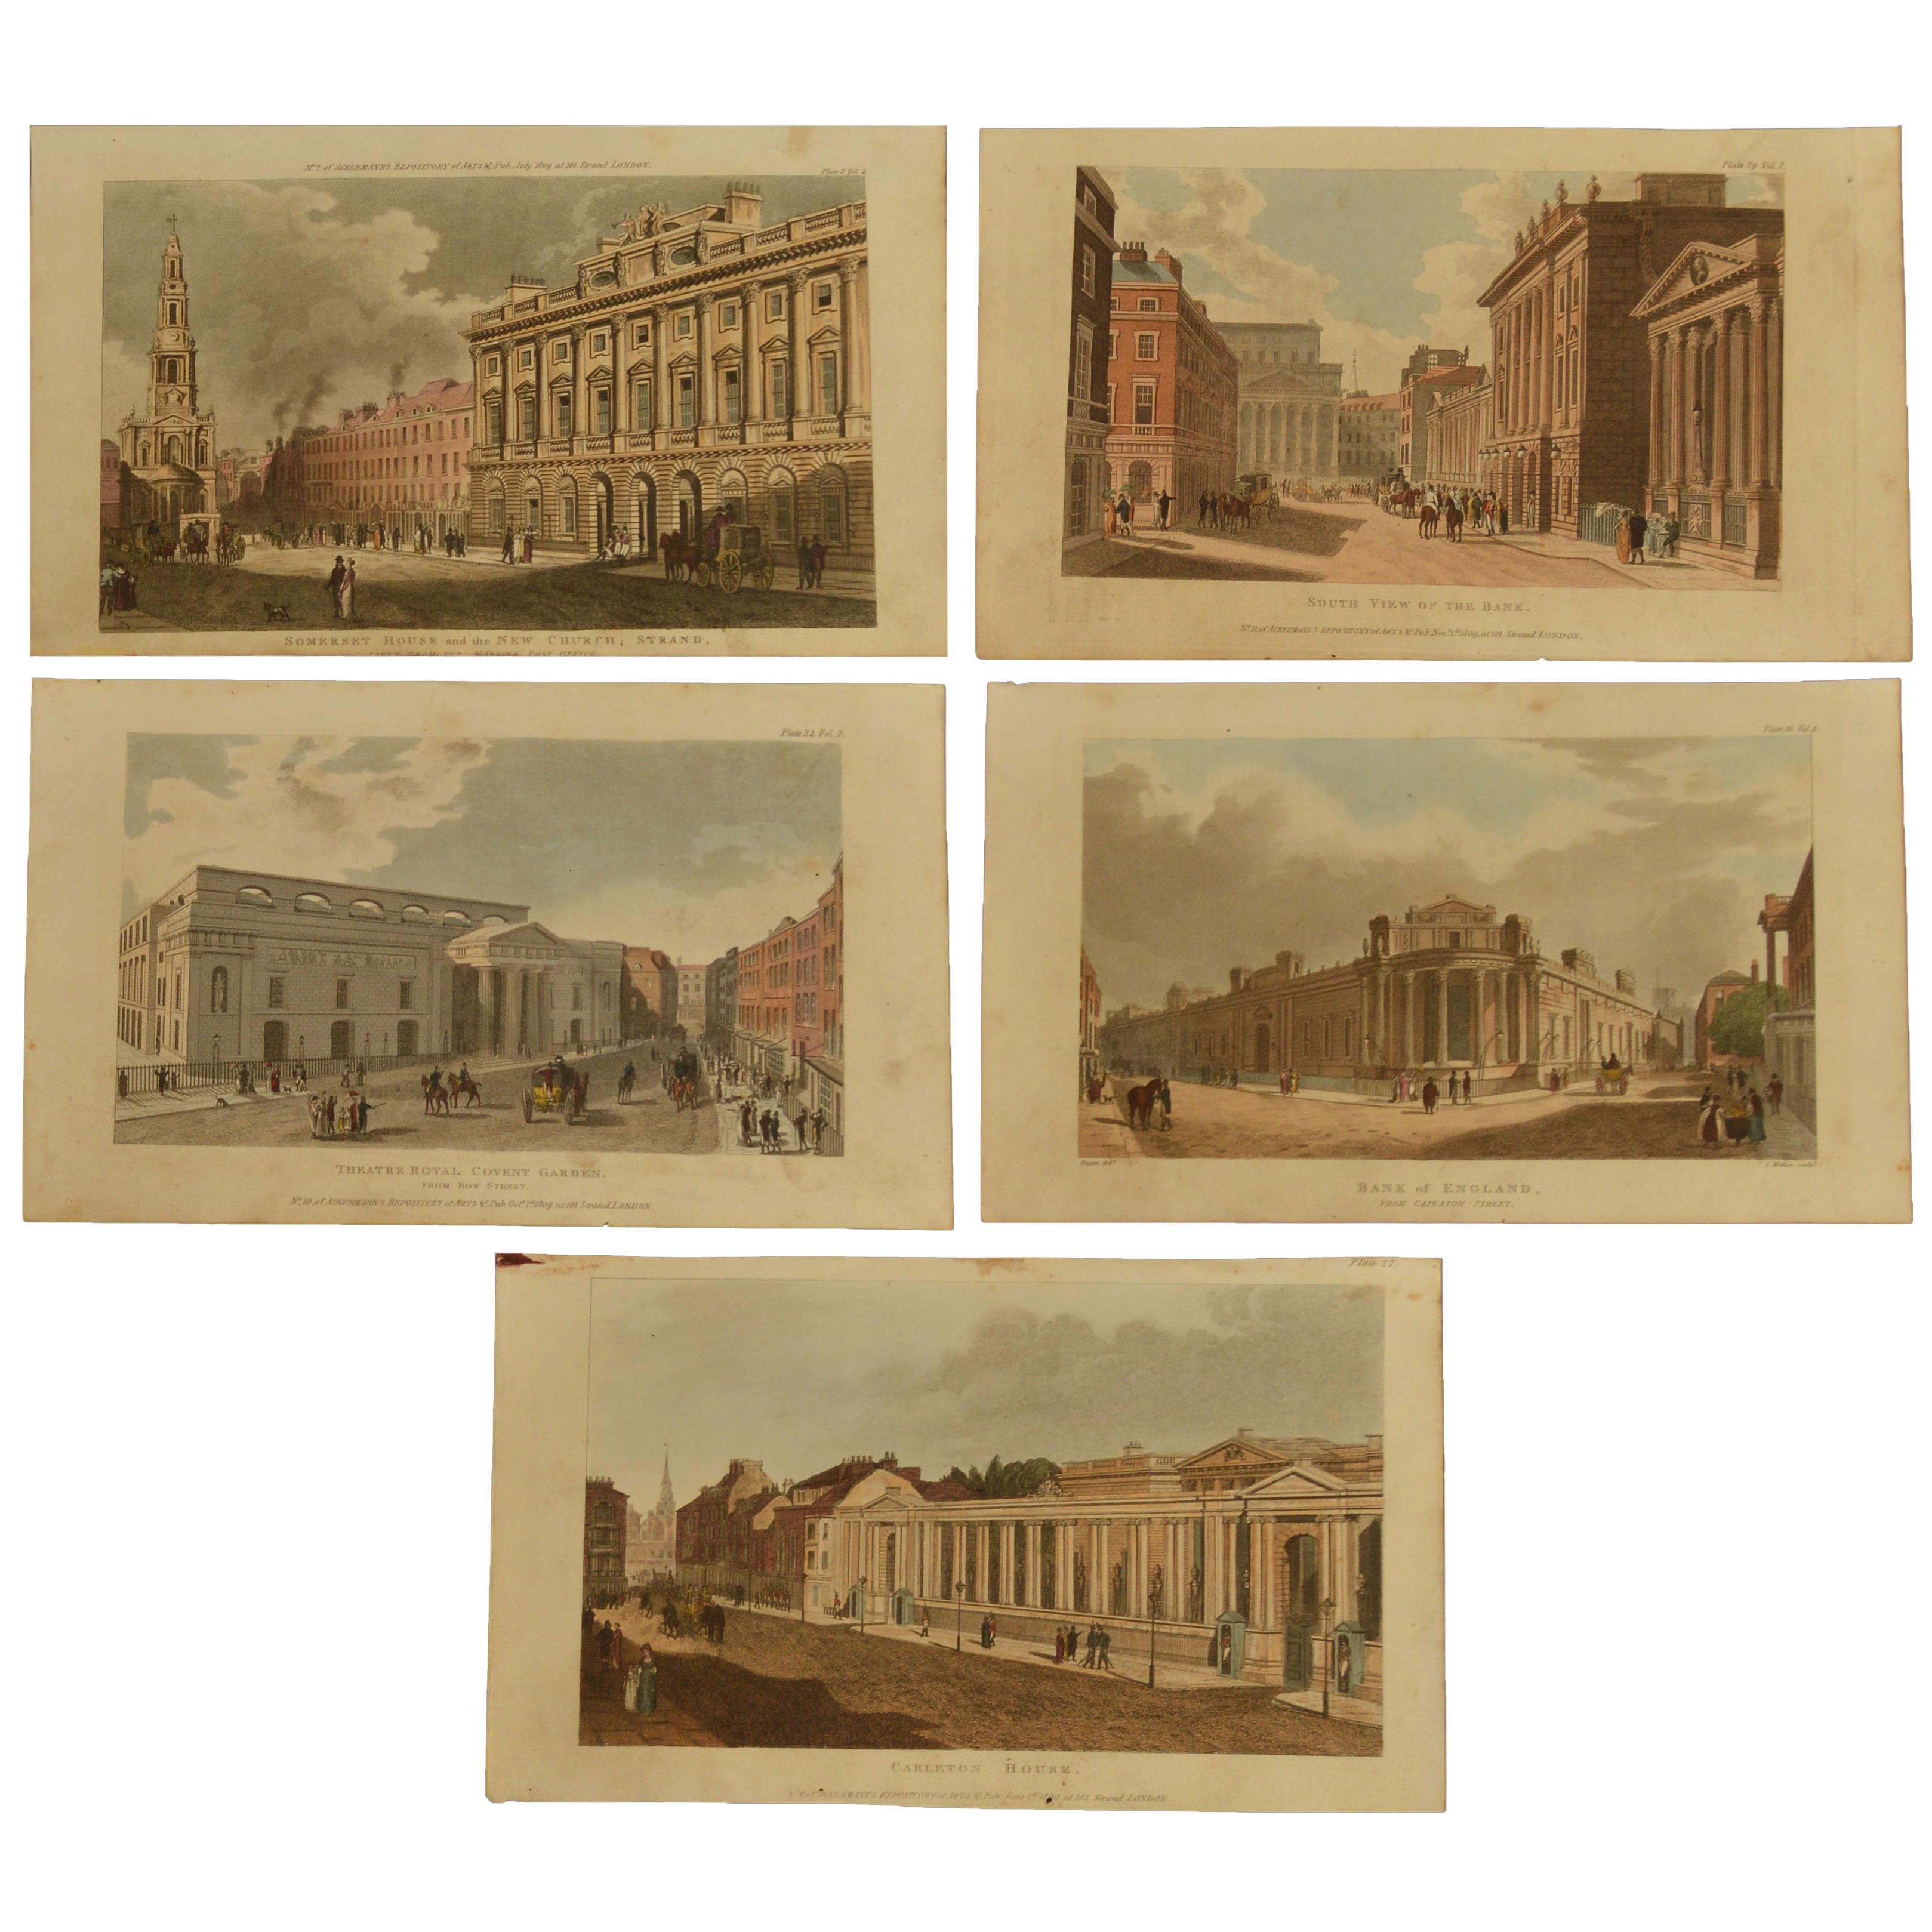 Wonderful set of prints of London's Architecture

Aquatints with original color after the original drawings by Pugin

From Ackermanns Reository. Dated 1809.

Mounted on black card.

Unframed.

The measurement given below is the card